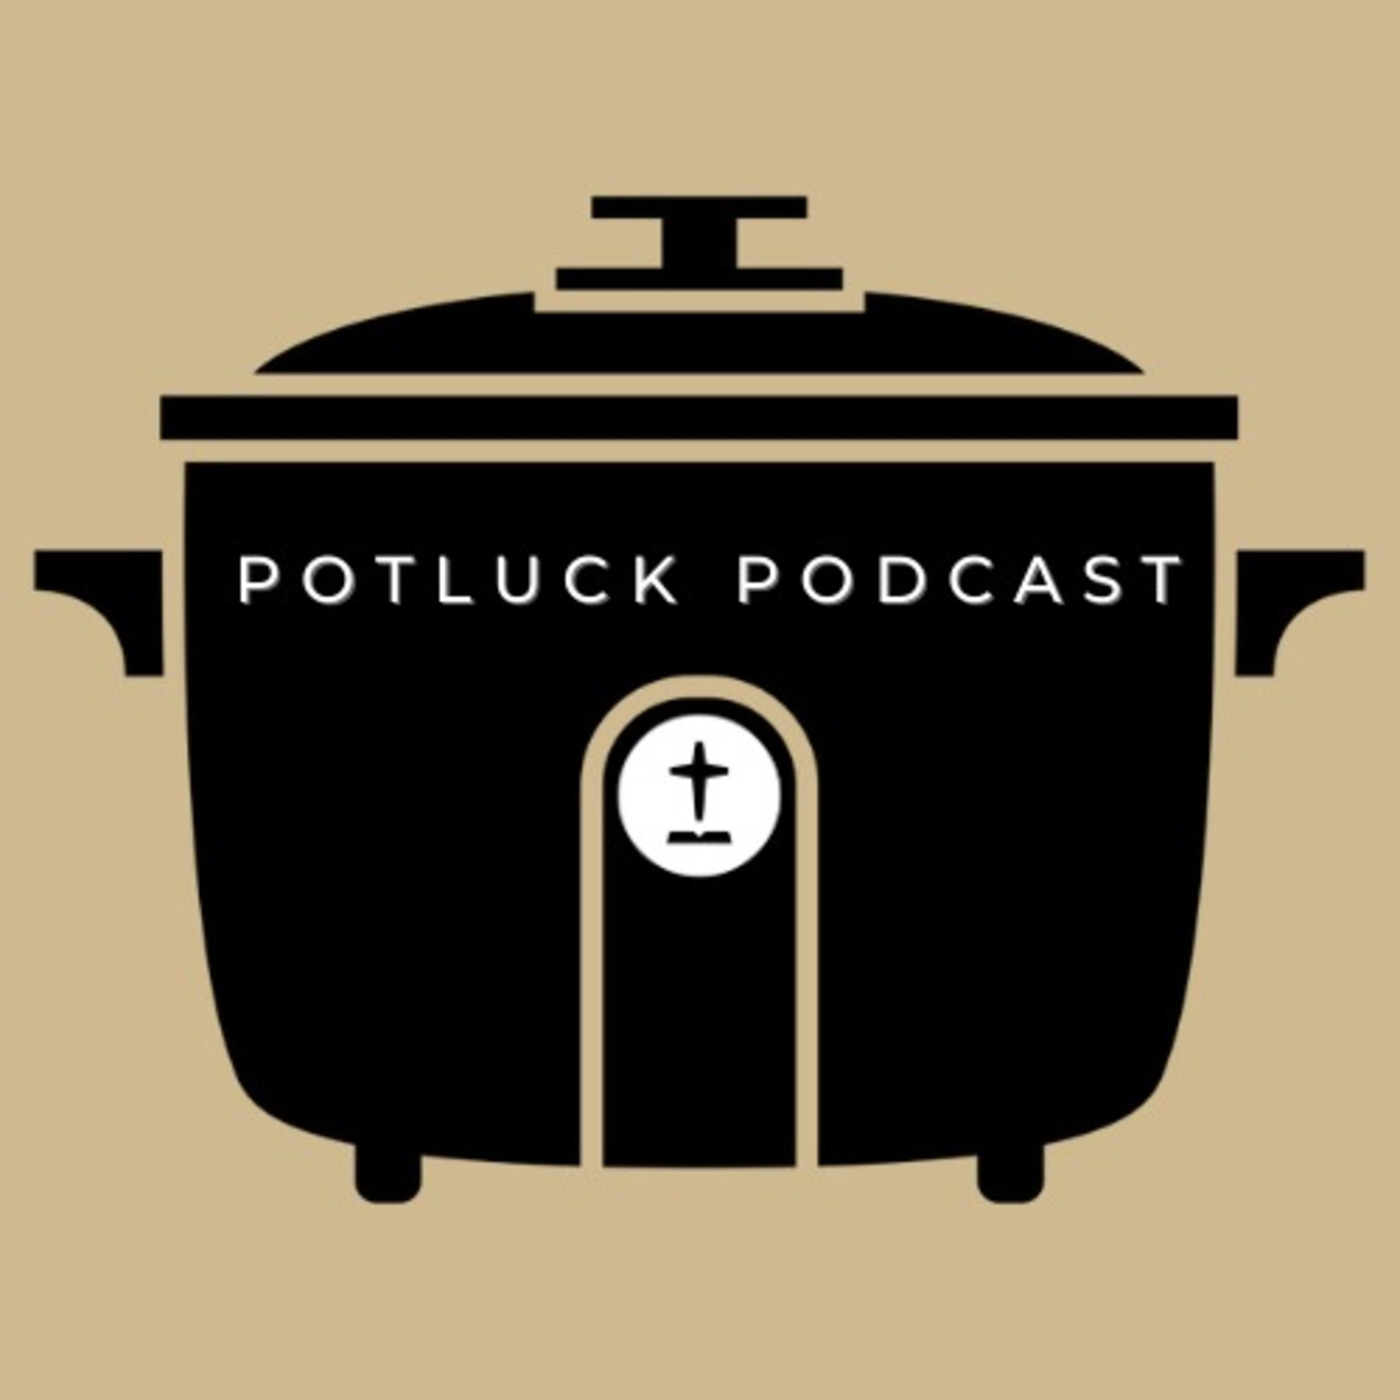 Episode 242: POTLUCK PODCAST 180: Allen’s Win, Adoption Month, and Axe Throwing